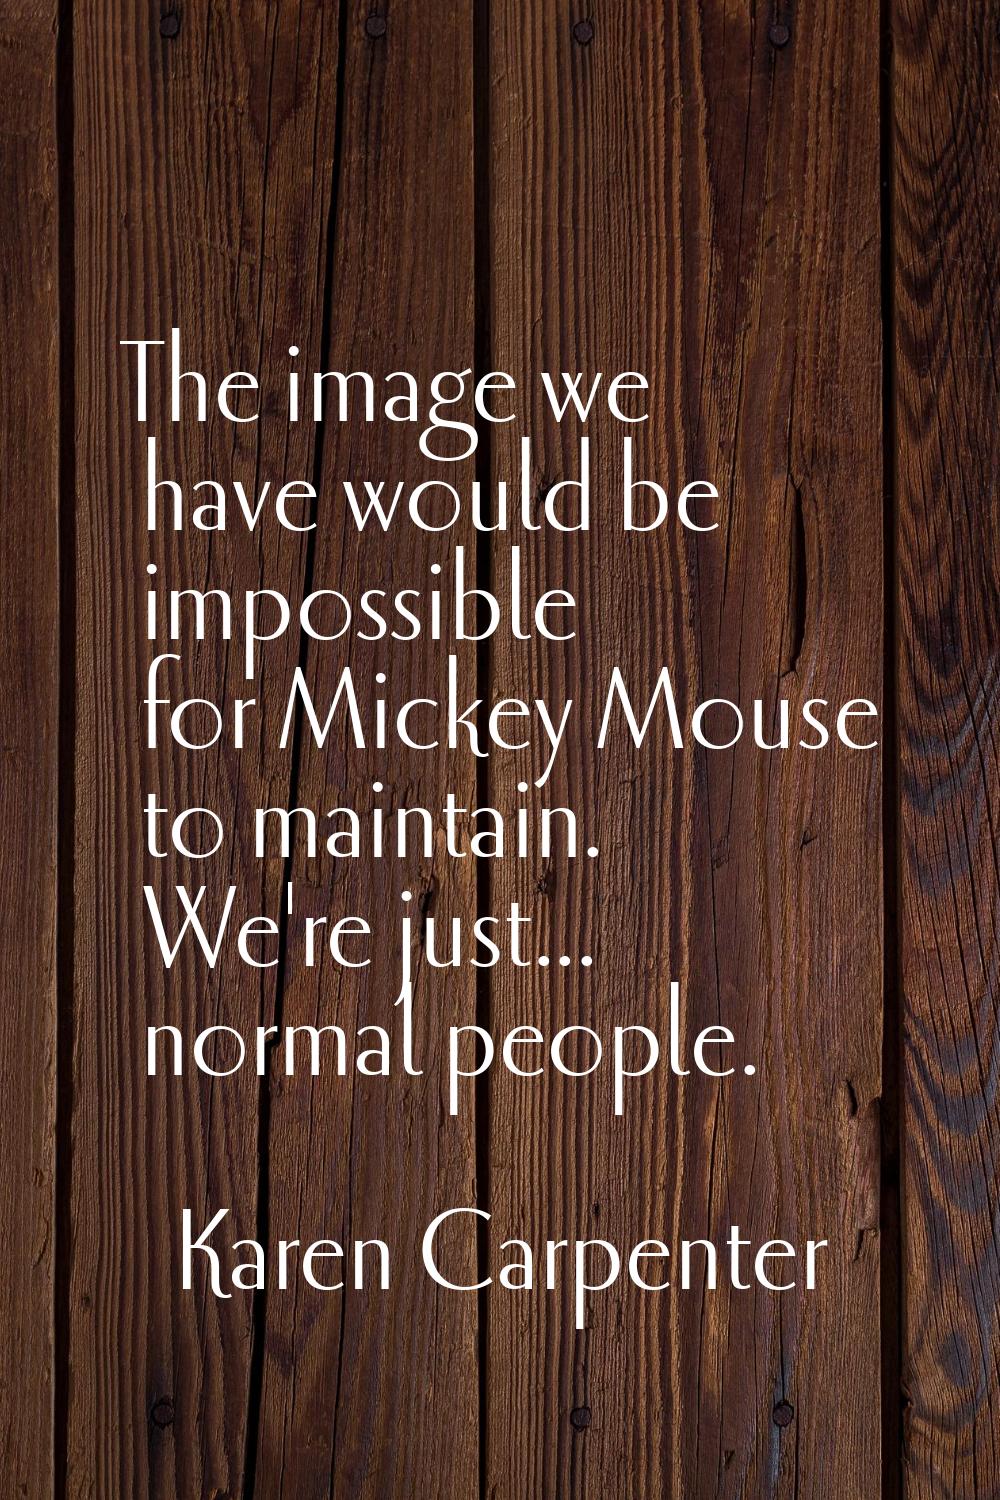 The image we have would be impossible for Mickey Mouse to maintain. We're just... normal people.